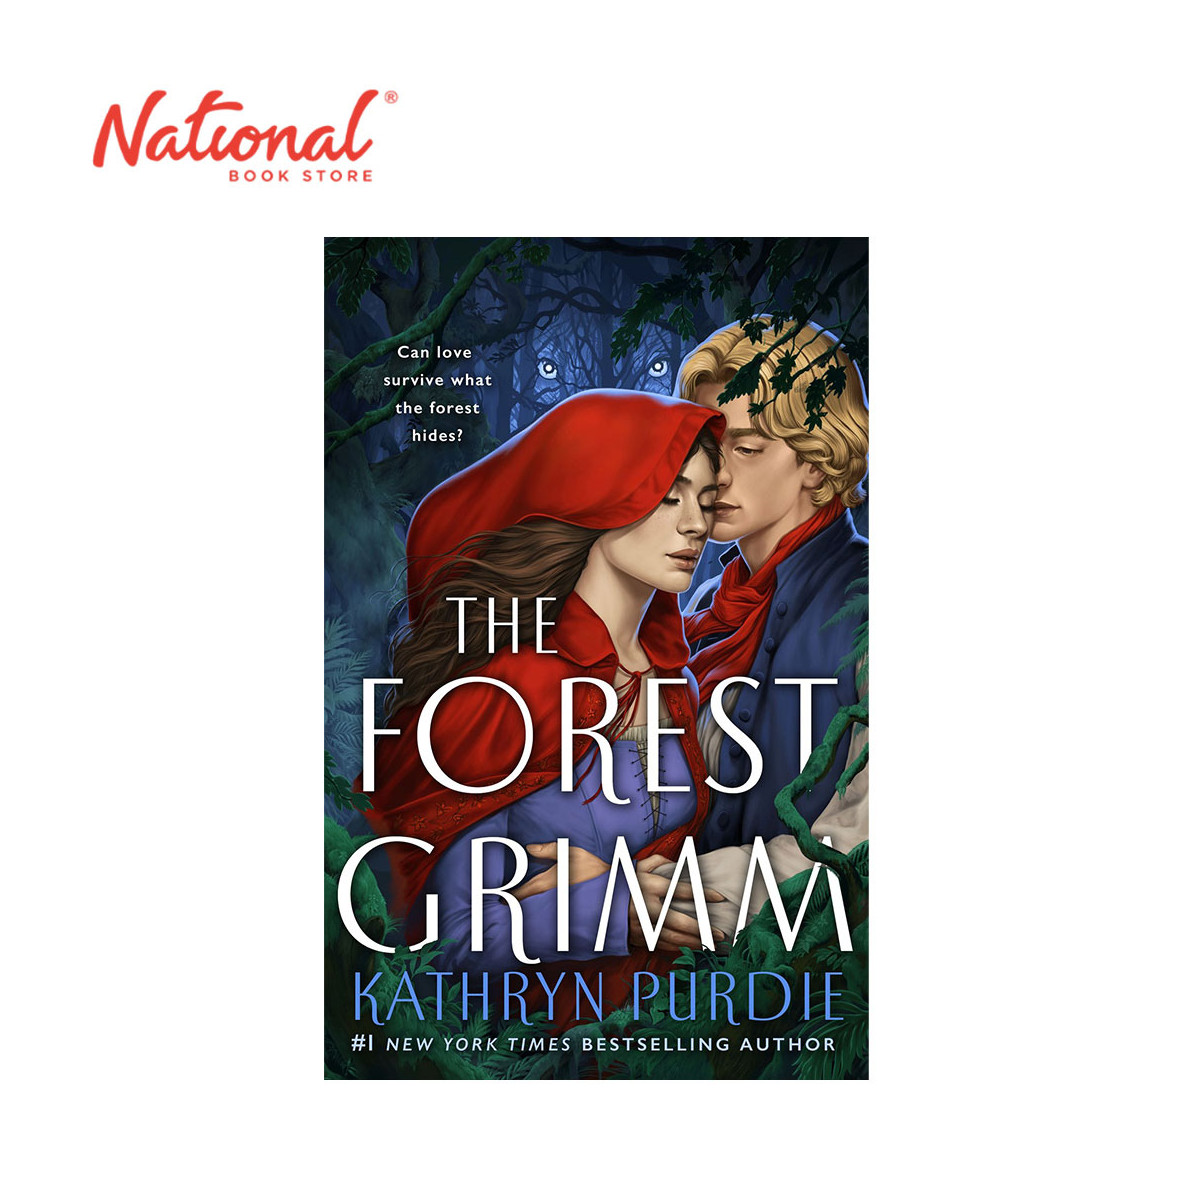 The Forest Grimm by Kathryn Purdie - Trade Paperback - Teens Fiction